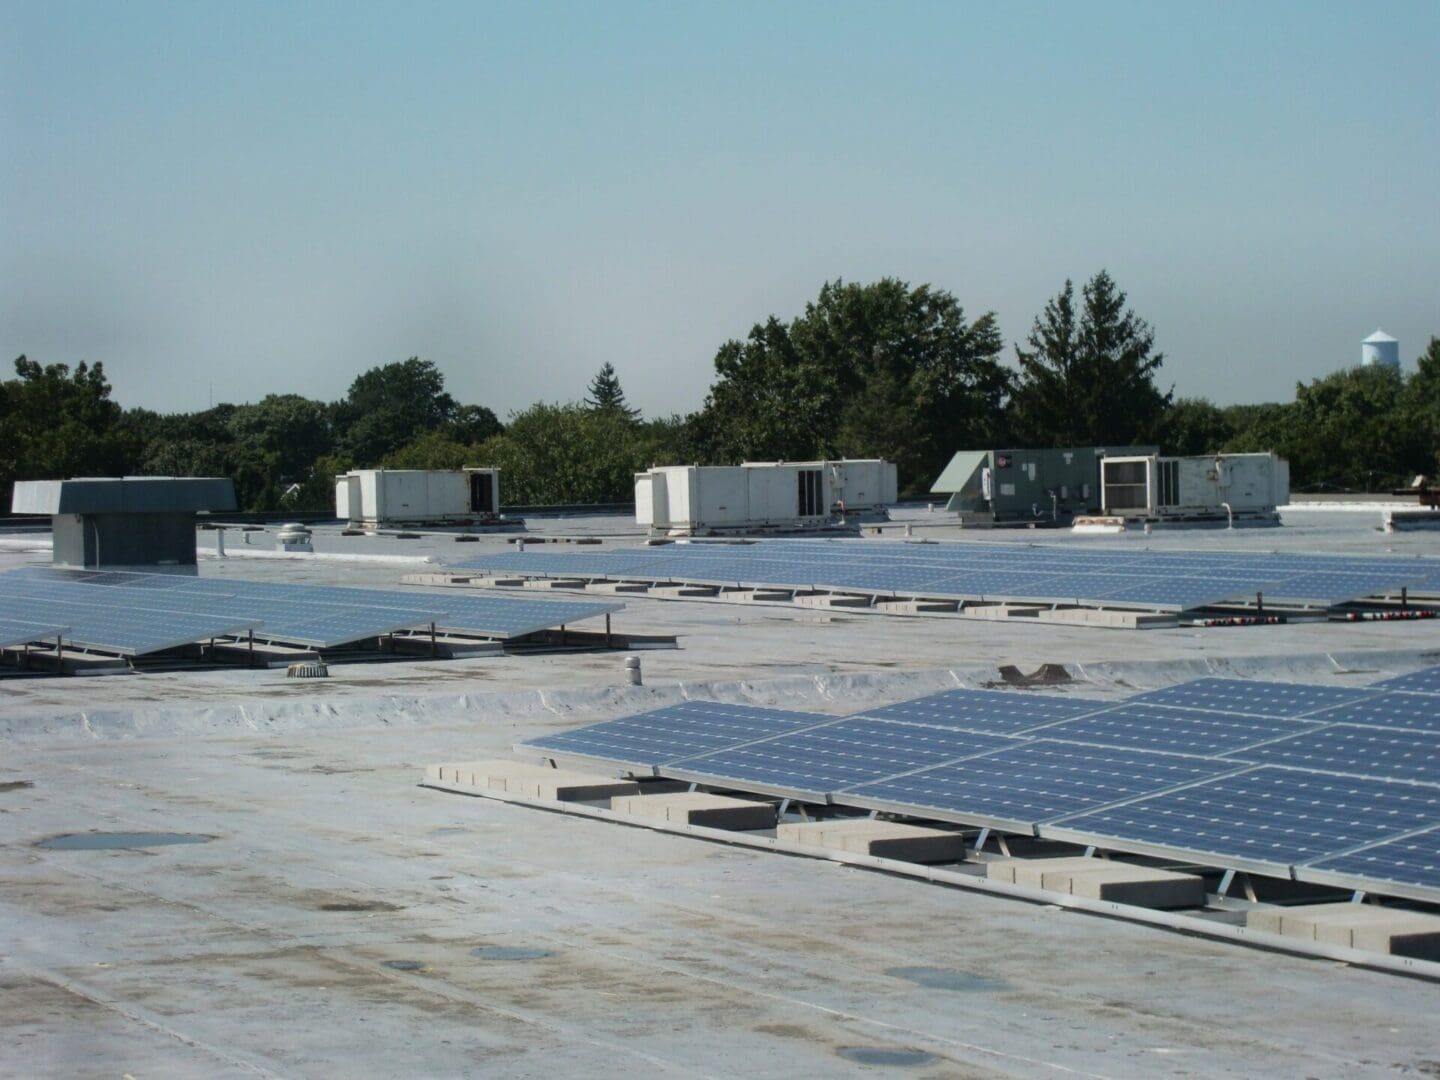 A large field of solar panels on top of concrete.